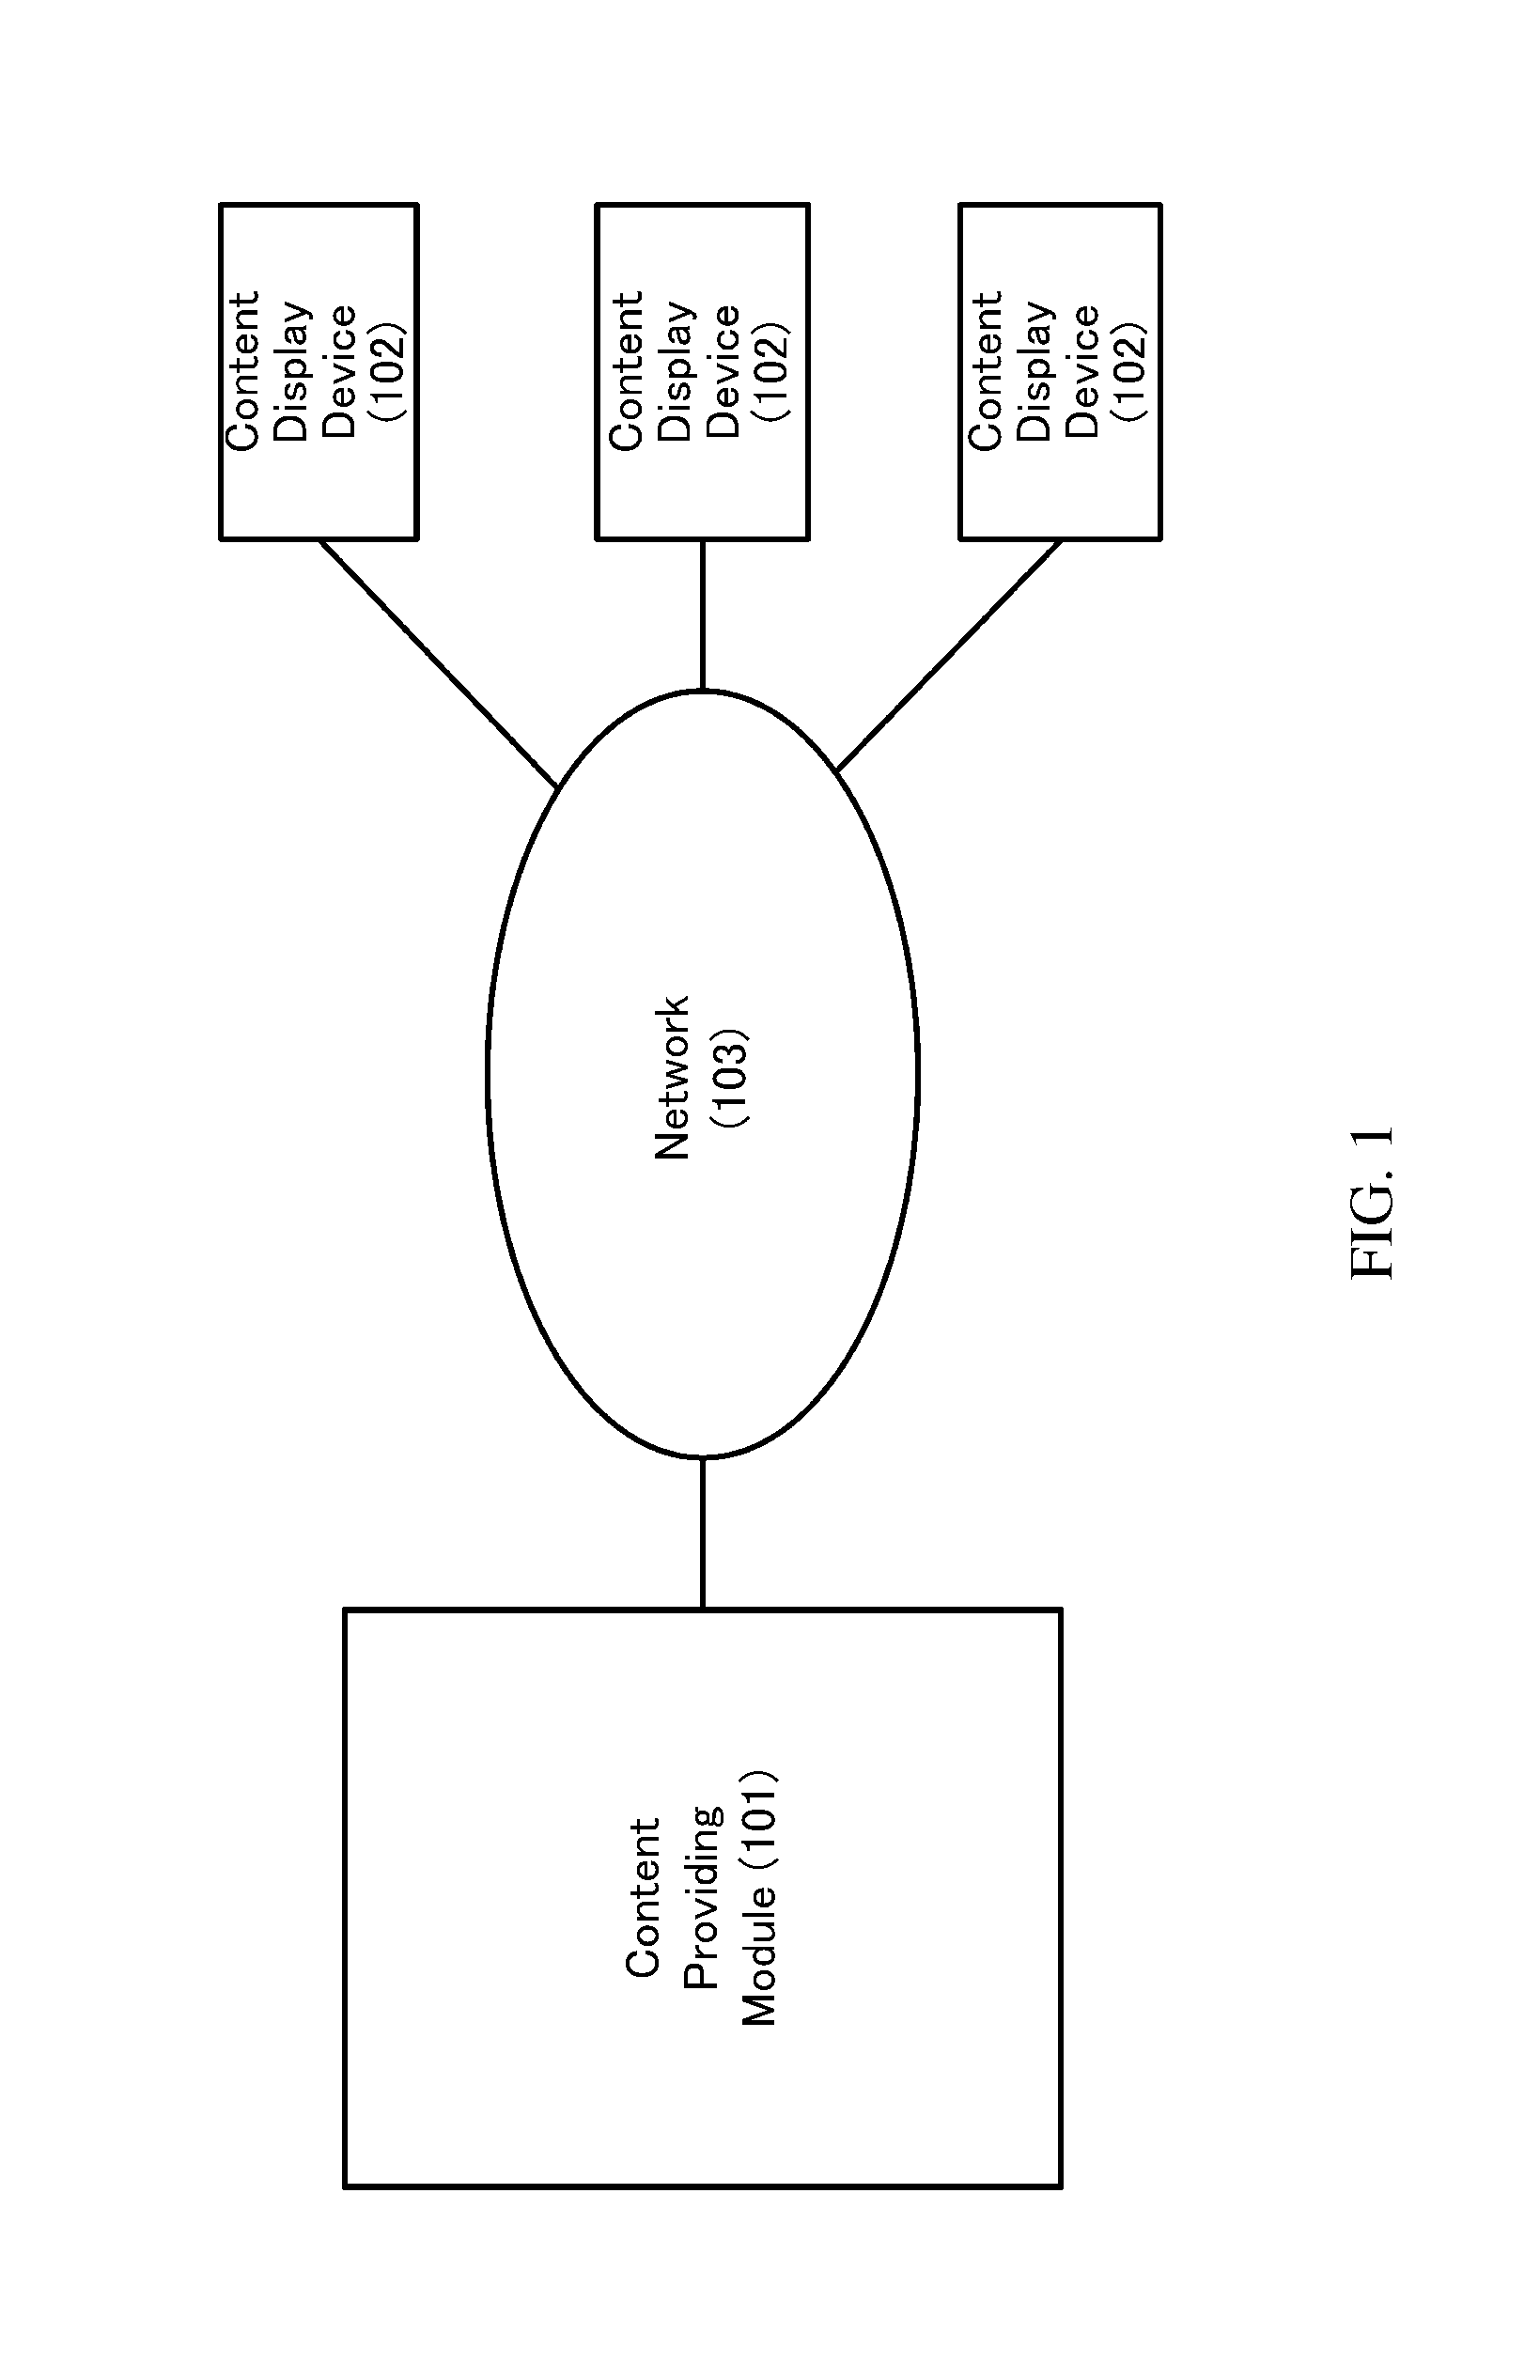 Content providing apparatus compatible with various terminal devices